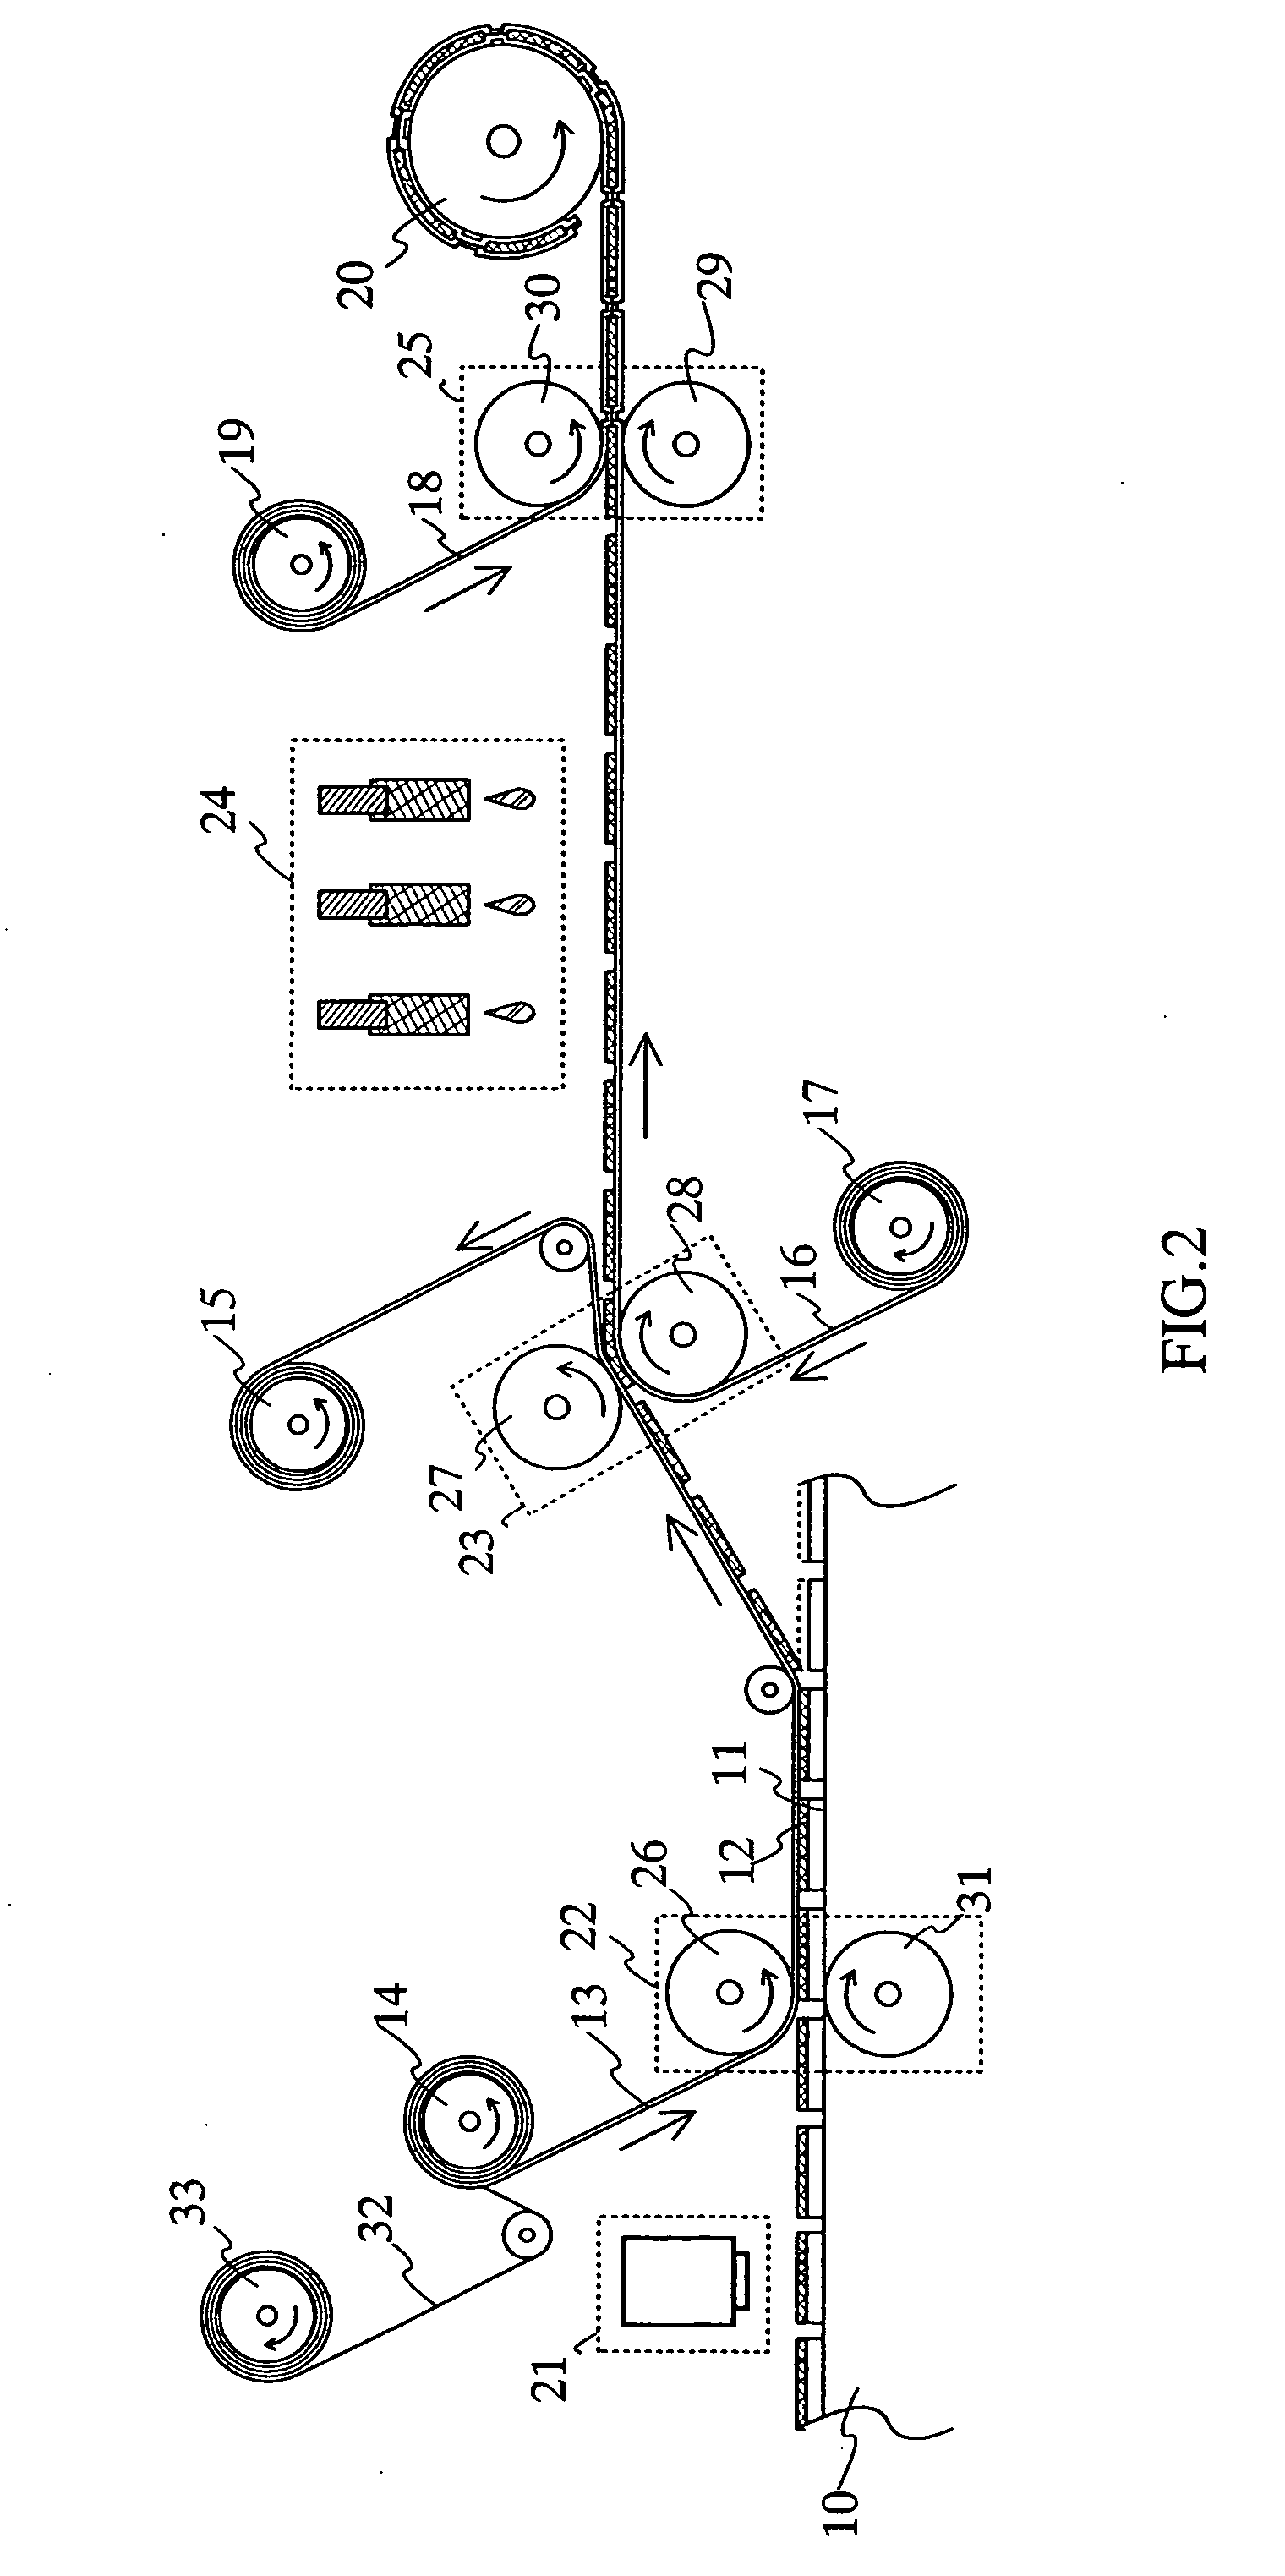 Display device, method for manufacturing the same and apparatus for manufacturing the same